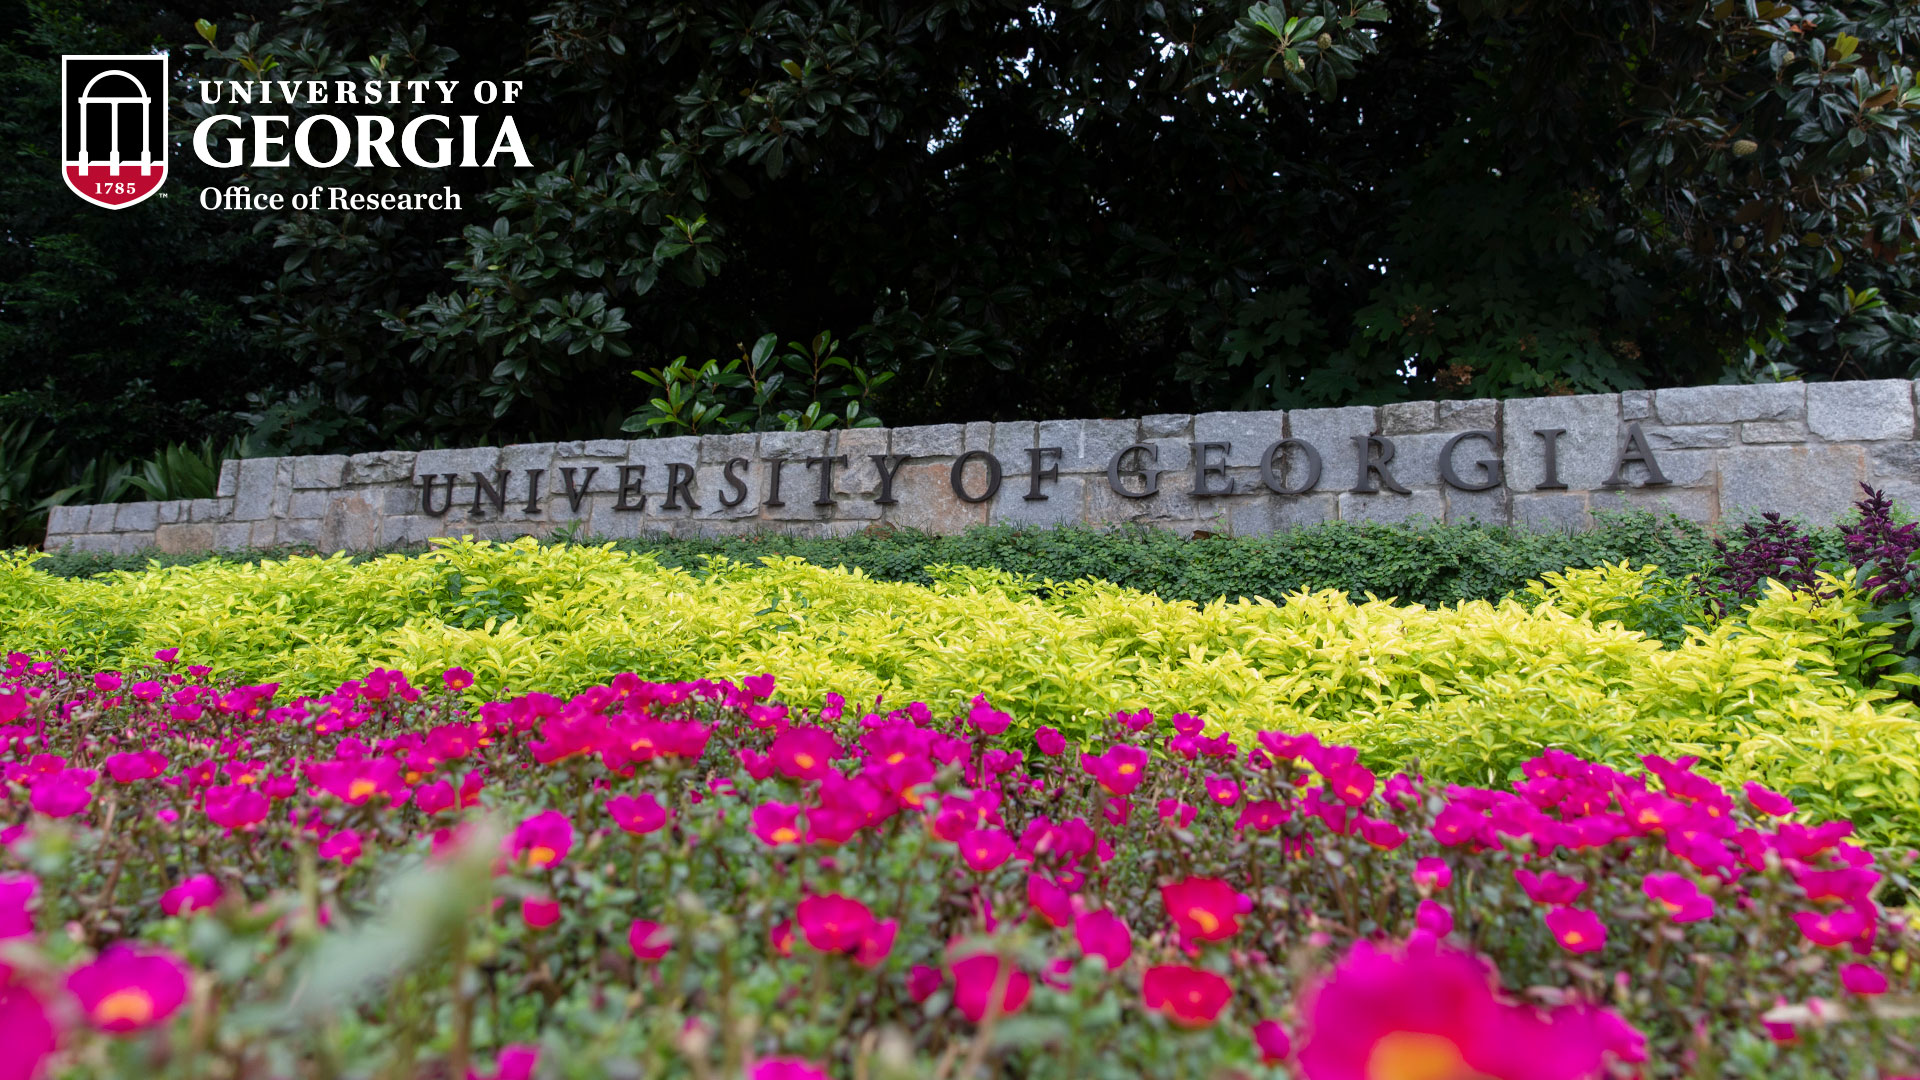 University of Georgia sign with flowers, Office of Research logo